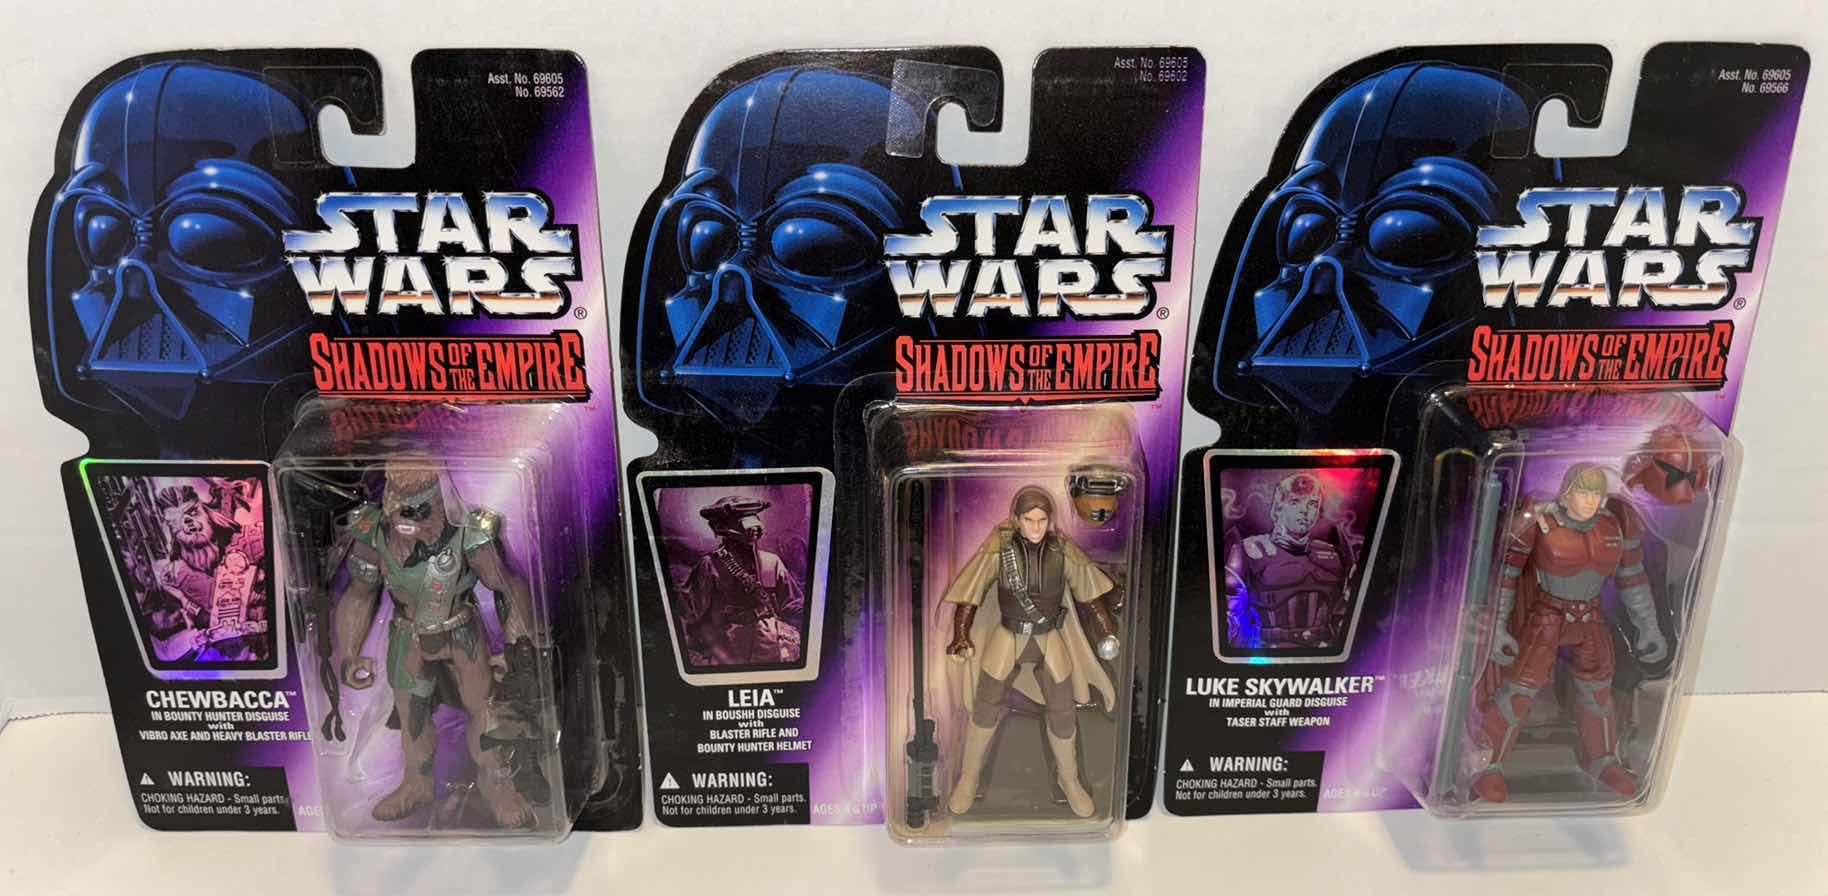 Photo 1 of NEW MINT COND 1996 HASBRO KENNER STAR WARS 3-PACK BUNDLE, SHADOWS OF THE EMPIRE “CHEWBACCA”, “LEIA” & “LUKE SKYWALKER” IN CLEAR CLAMSHELL PACKAGING